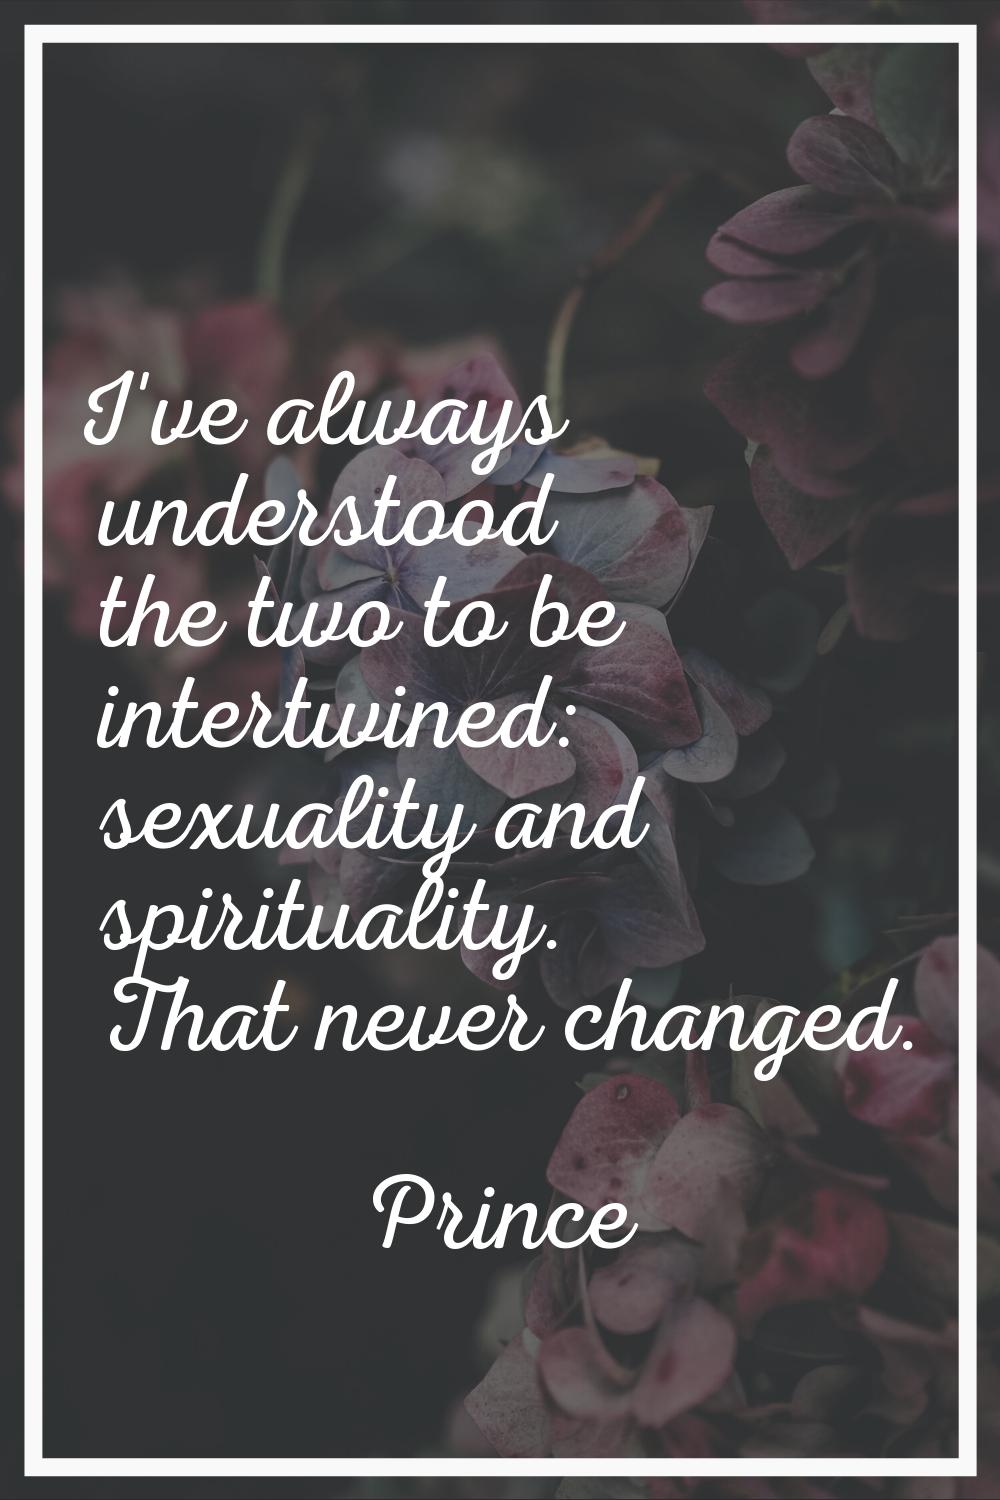 I've always understood the two to be intertwined: sexuality and spirituality. That never changed.